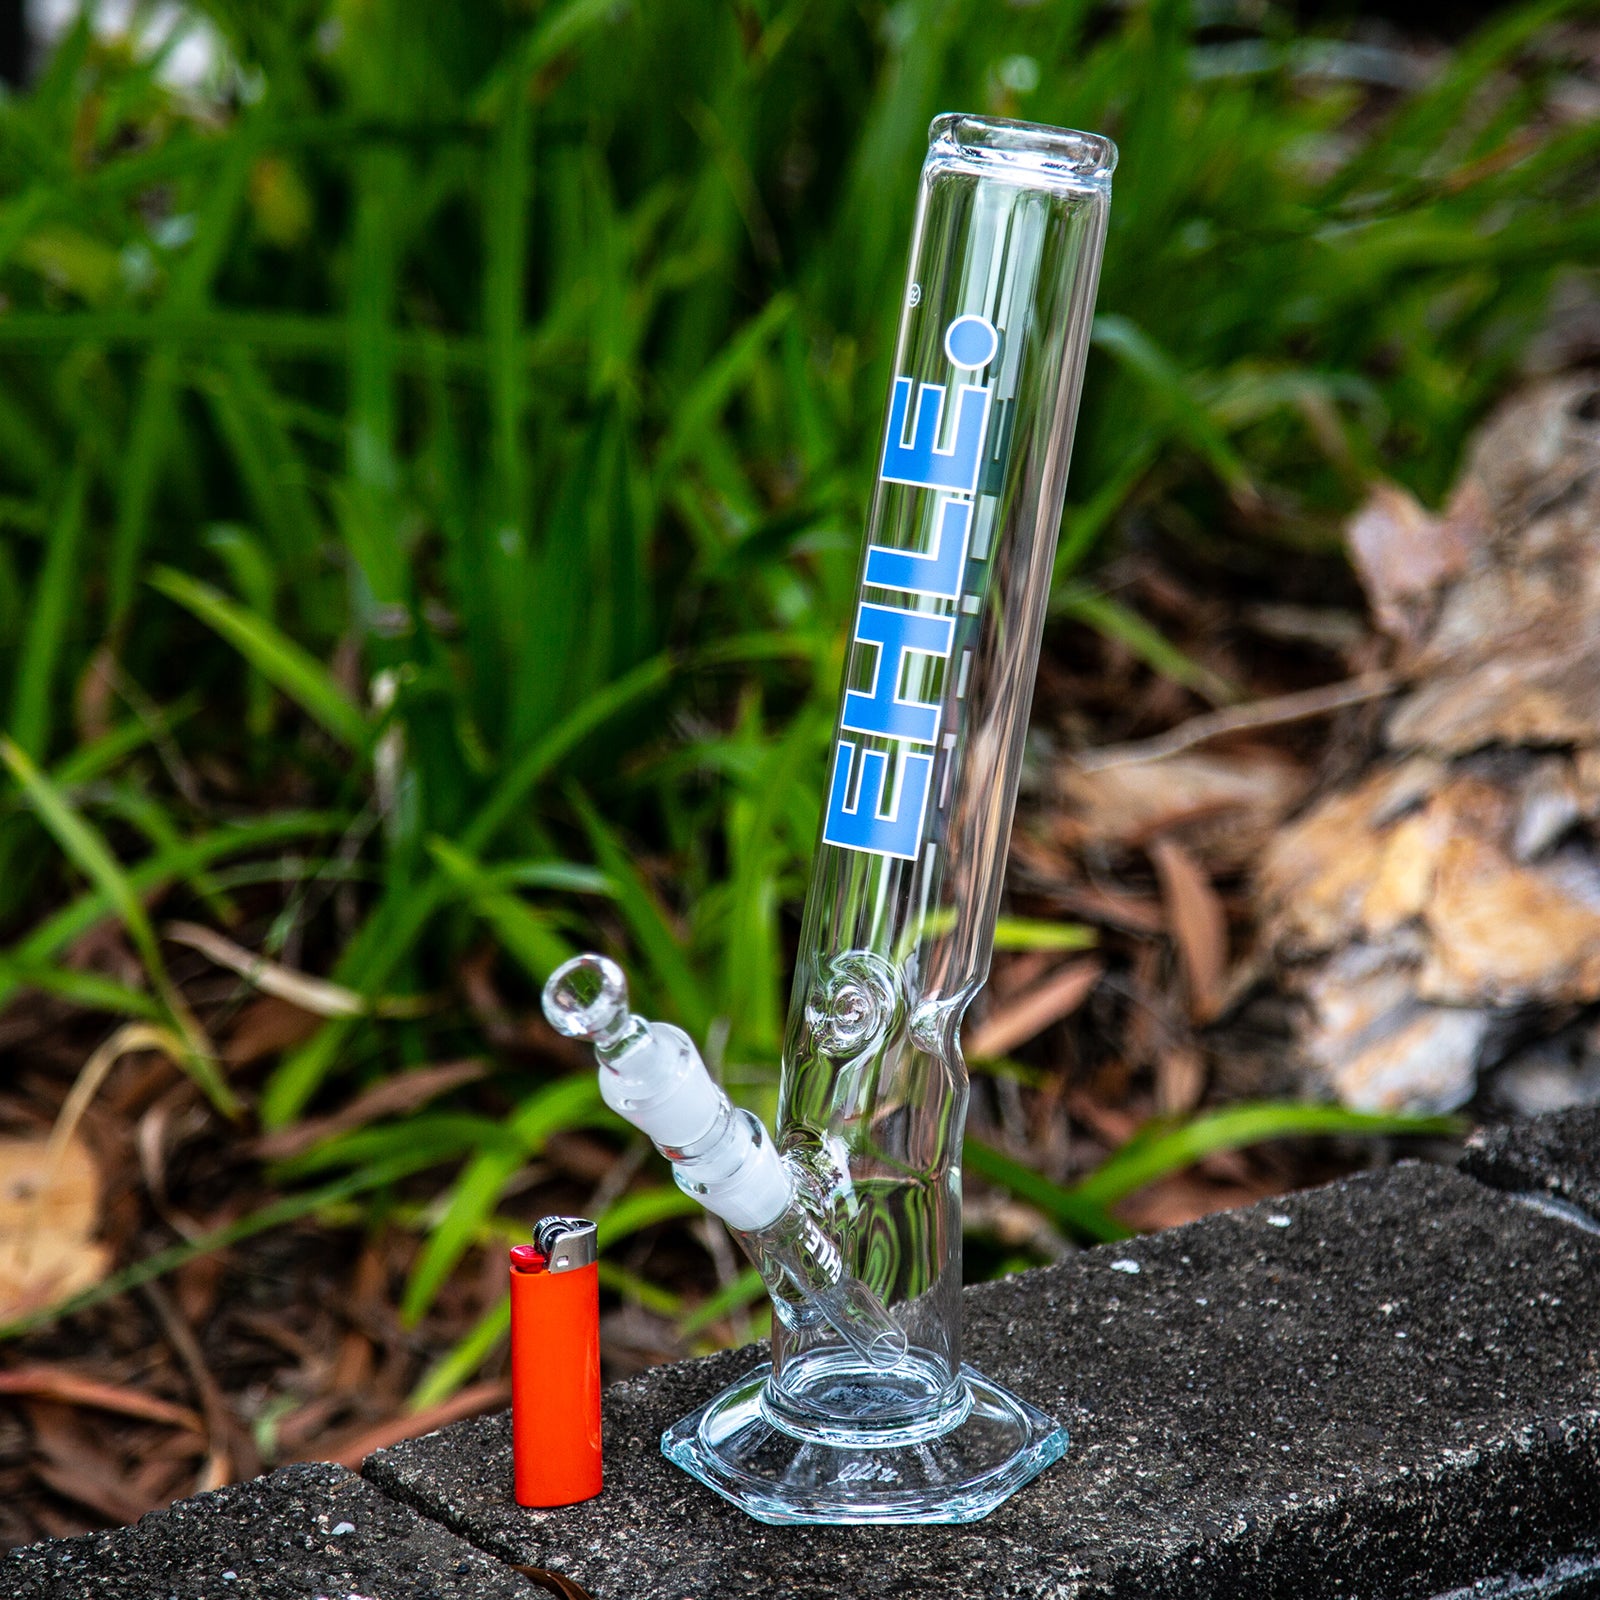 EHLE glass bongs for sale Melbourne.